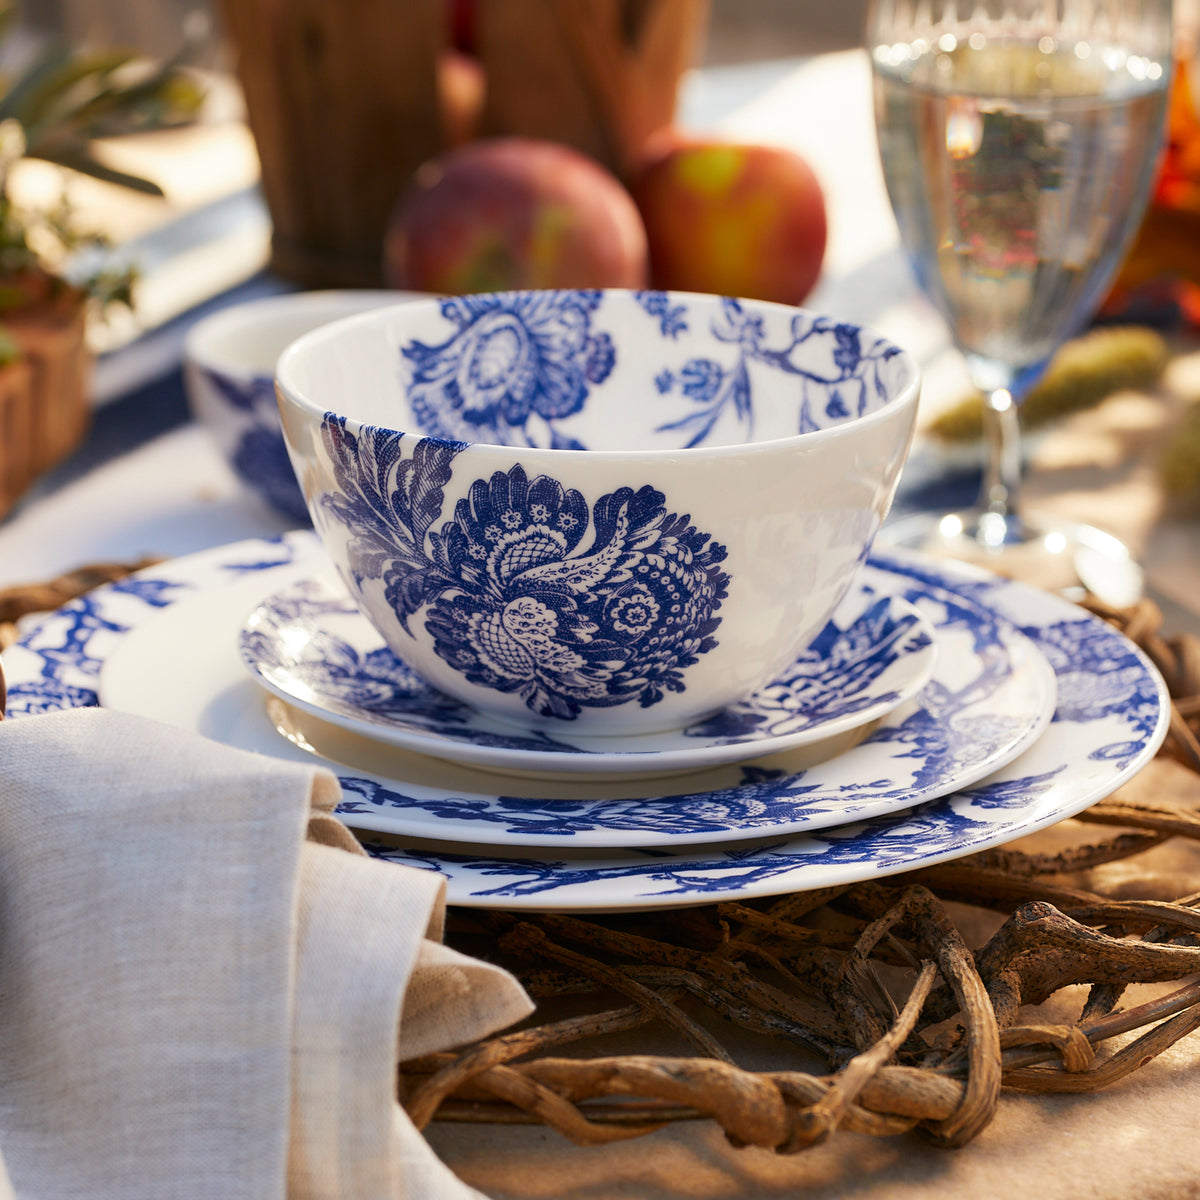 A white Arcadia Caskata porcelain dinnerware set with blue floral patterns, consisting of an Arcadia Cereal Bowl, a plate, and a saucer, placed on a table next to a folded napkin, a wine glass, and apples in the background.